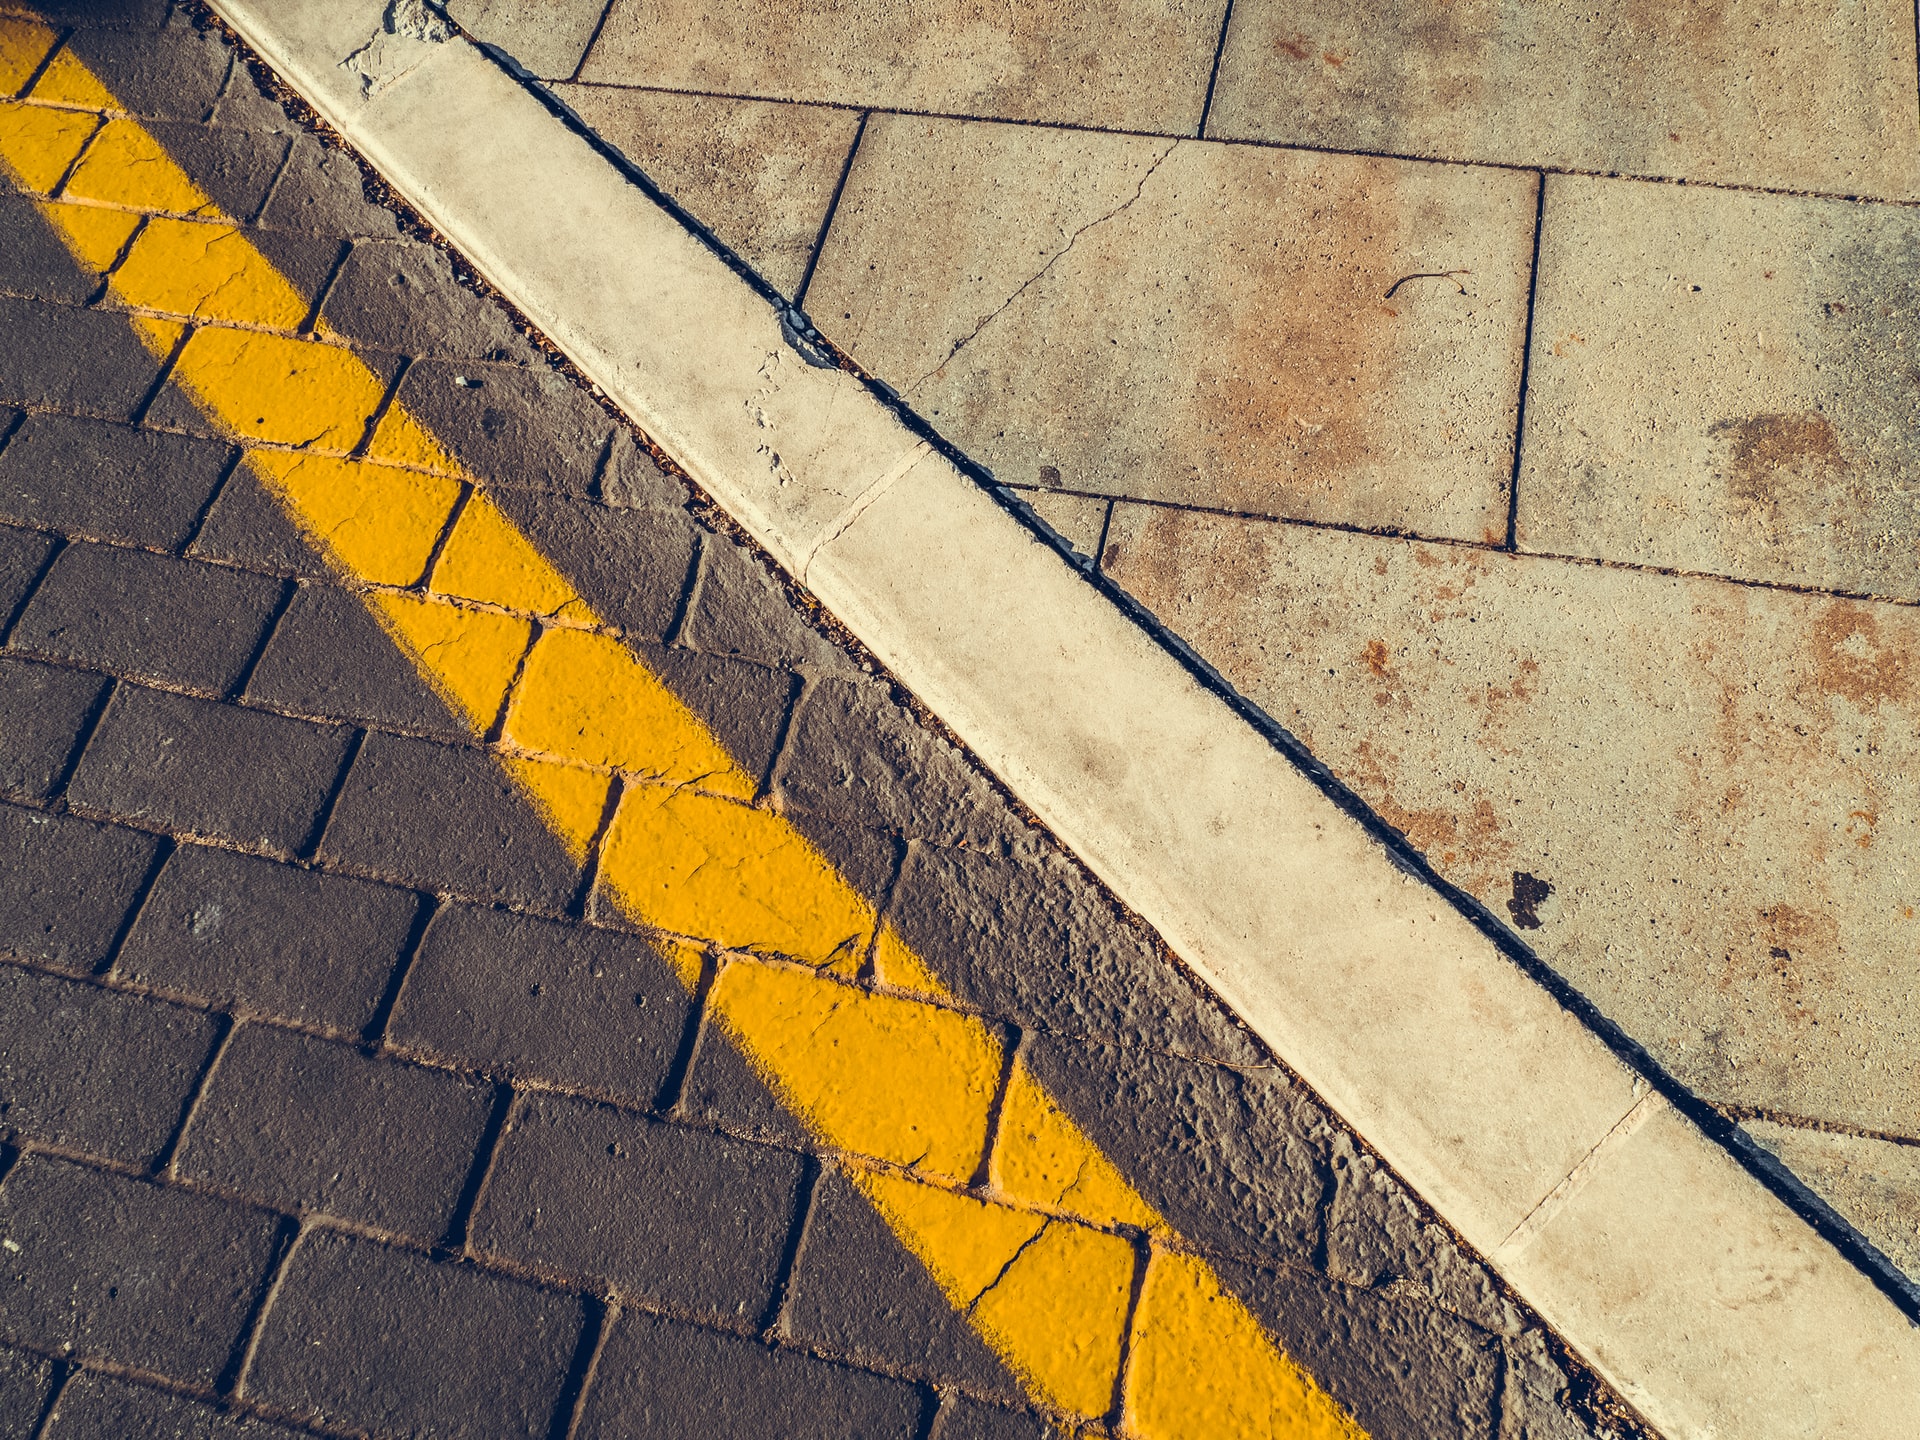 The line between road pavement and sidewalk pavement, emphasized by a painted yellow line.